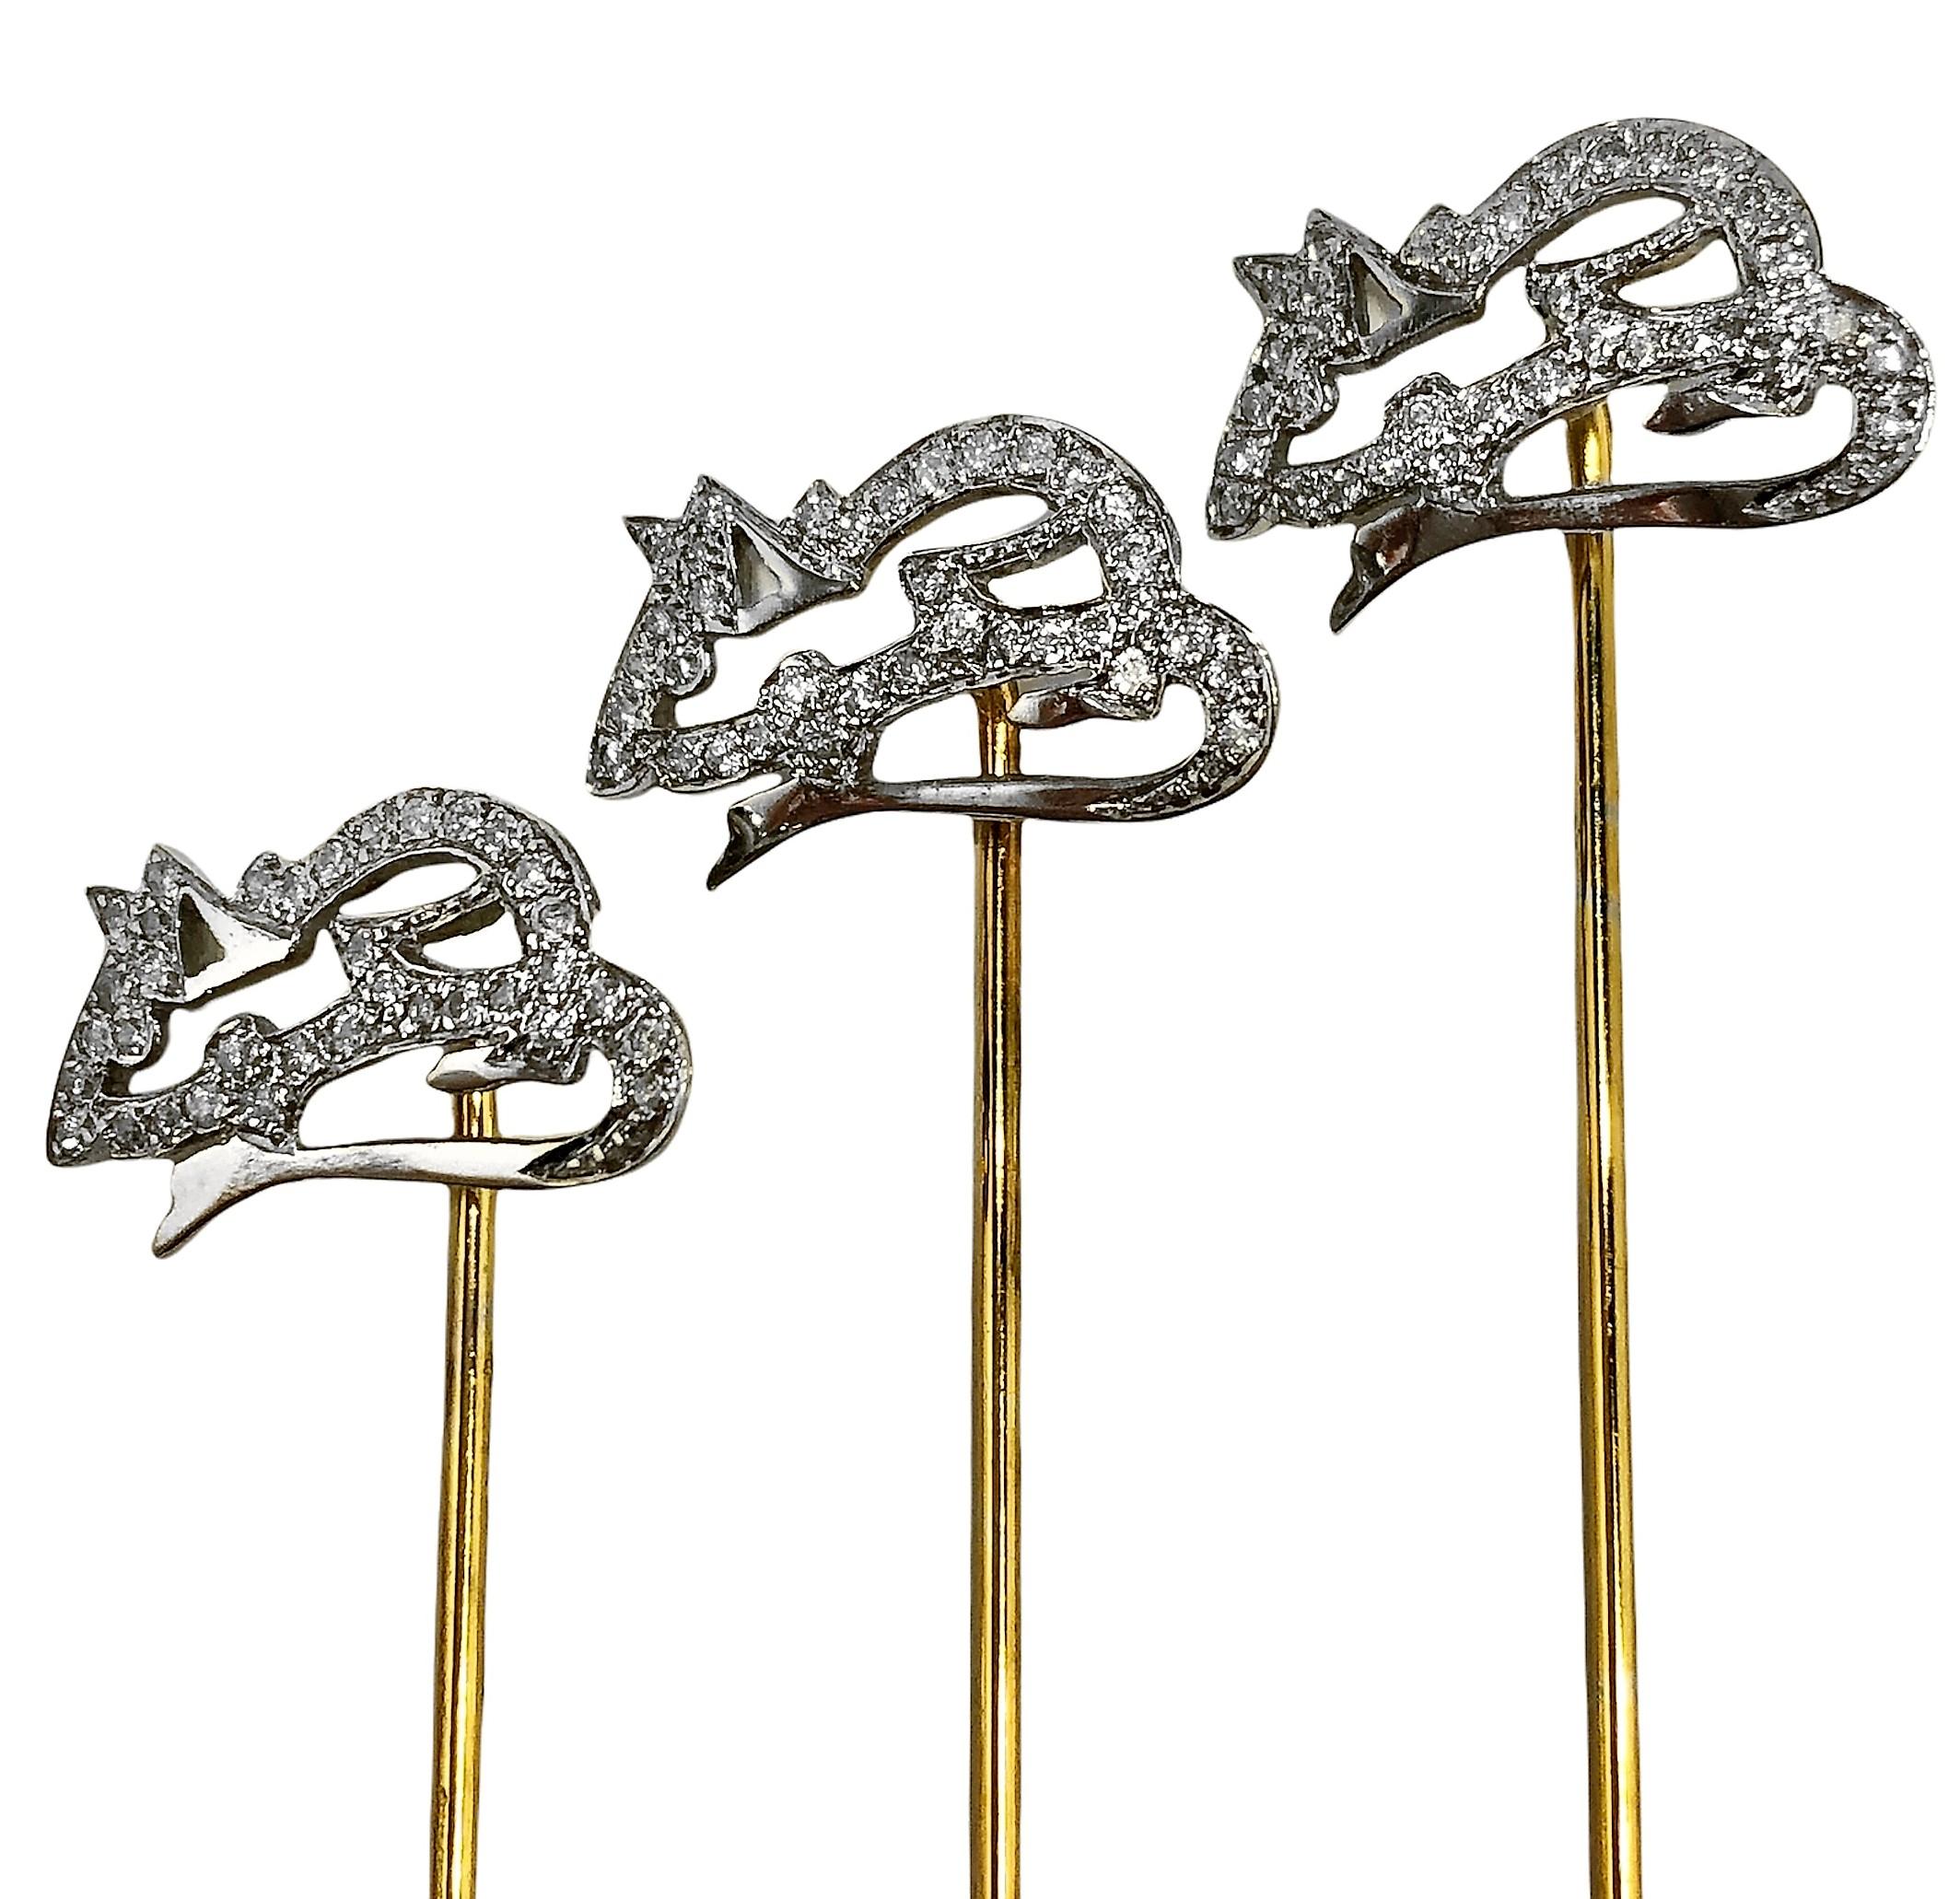 This whimsical set of three mice can be worn separately or together, evoking the much loved children's nursery rhyme. Each 18K white gold mouse is encrusted with brilliant cut diamonds. The yellow gold. pins attached to each mouse are made of 14K